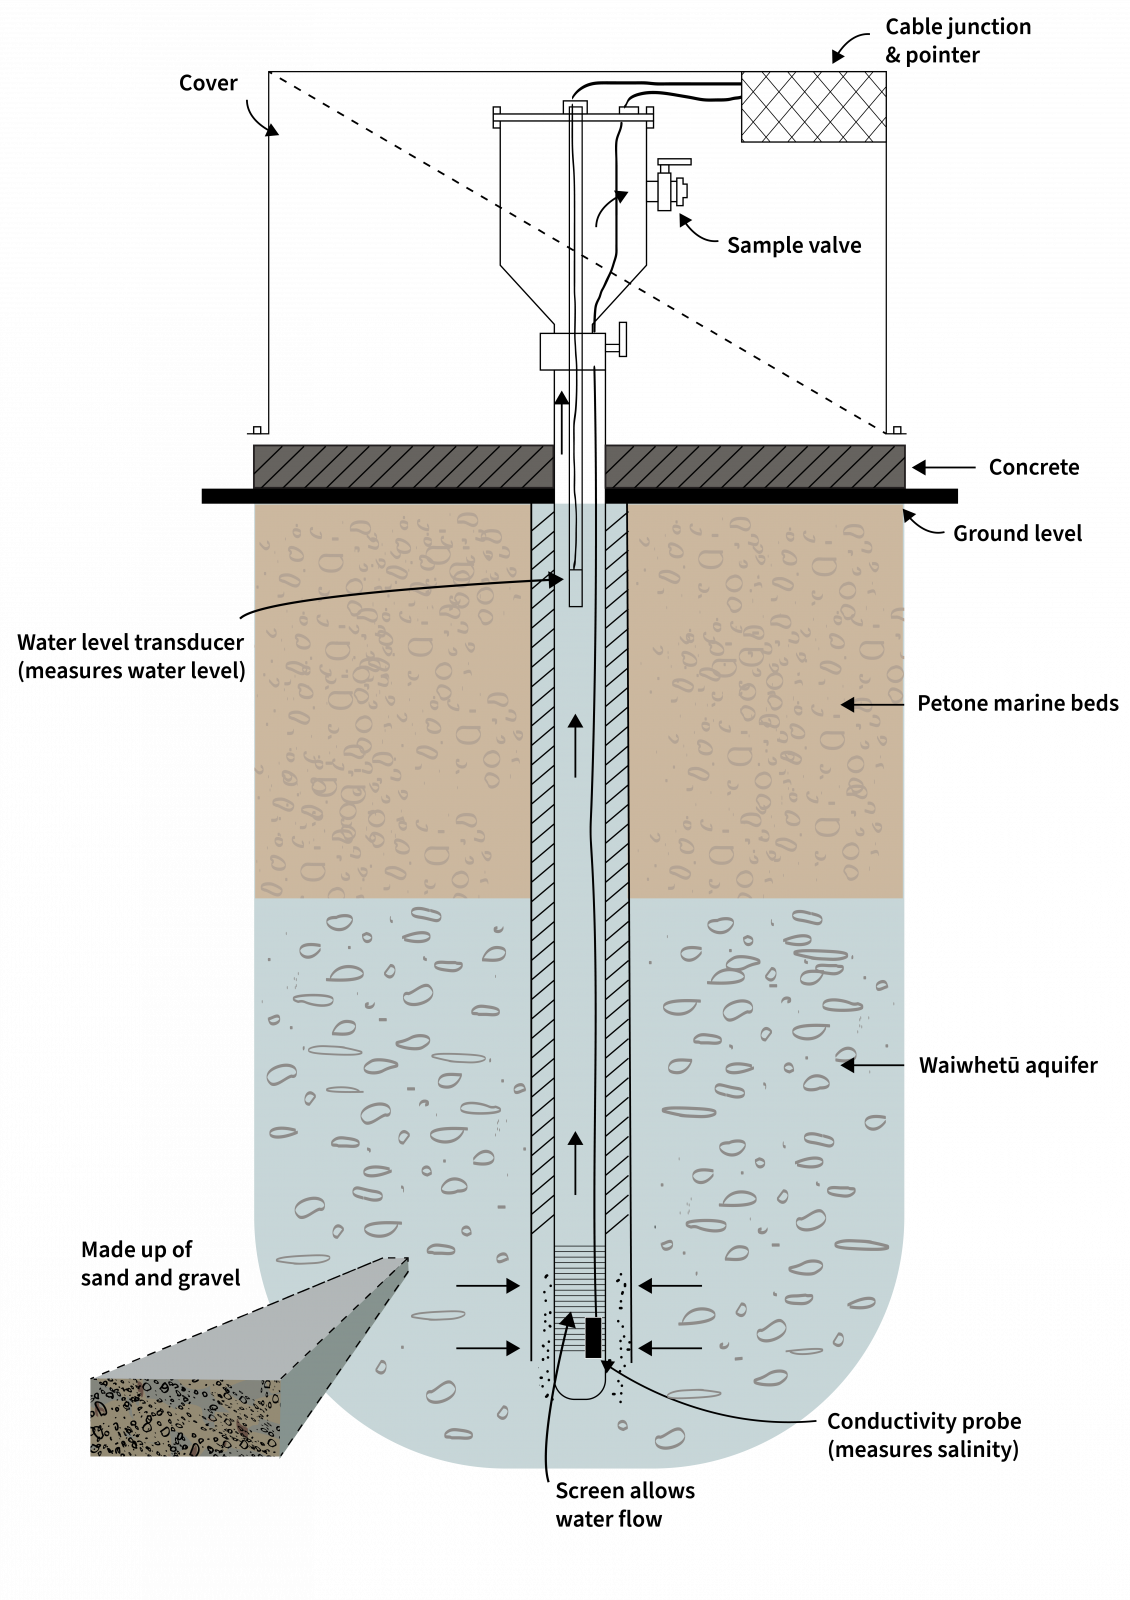 Illustration showing components of a bore